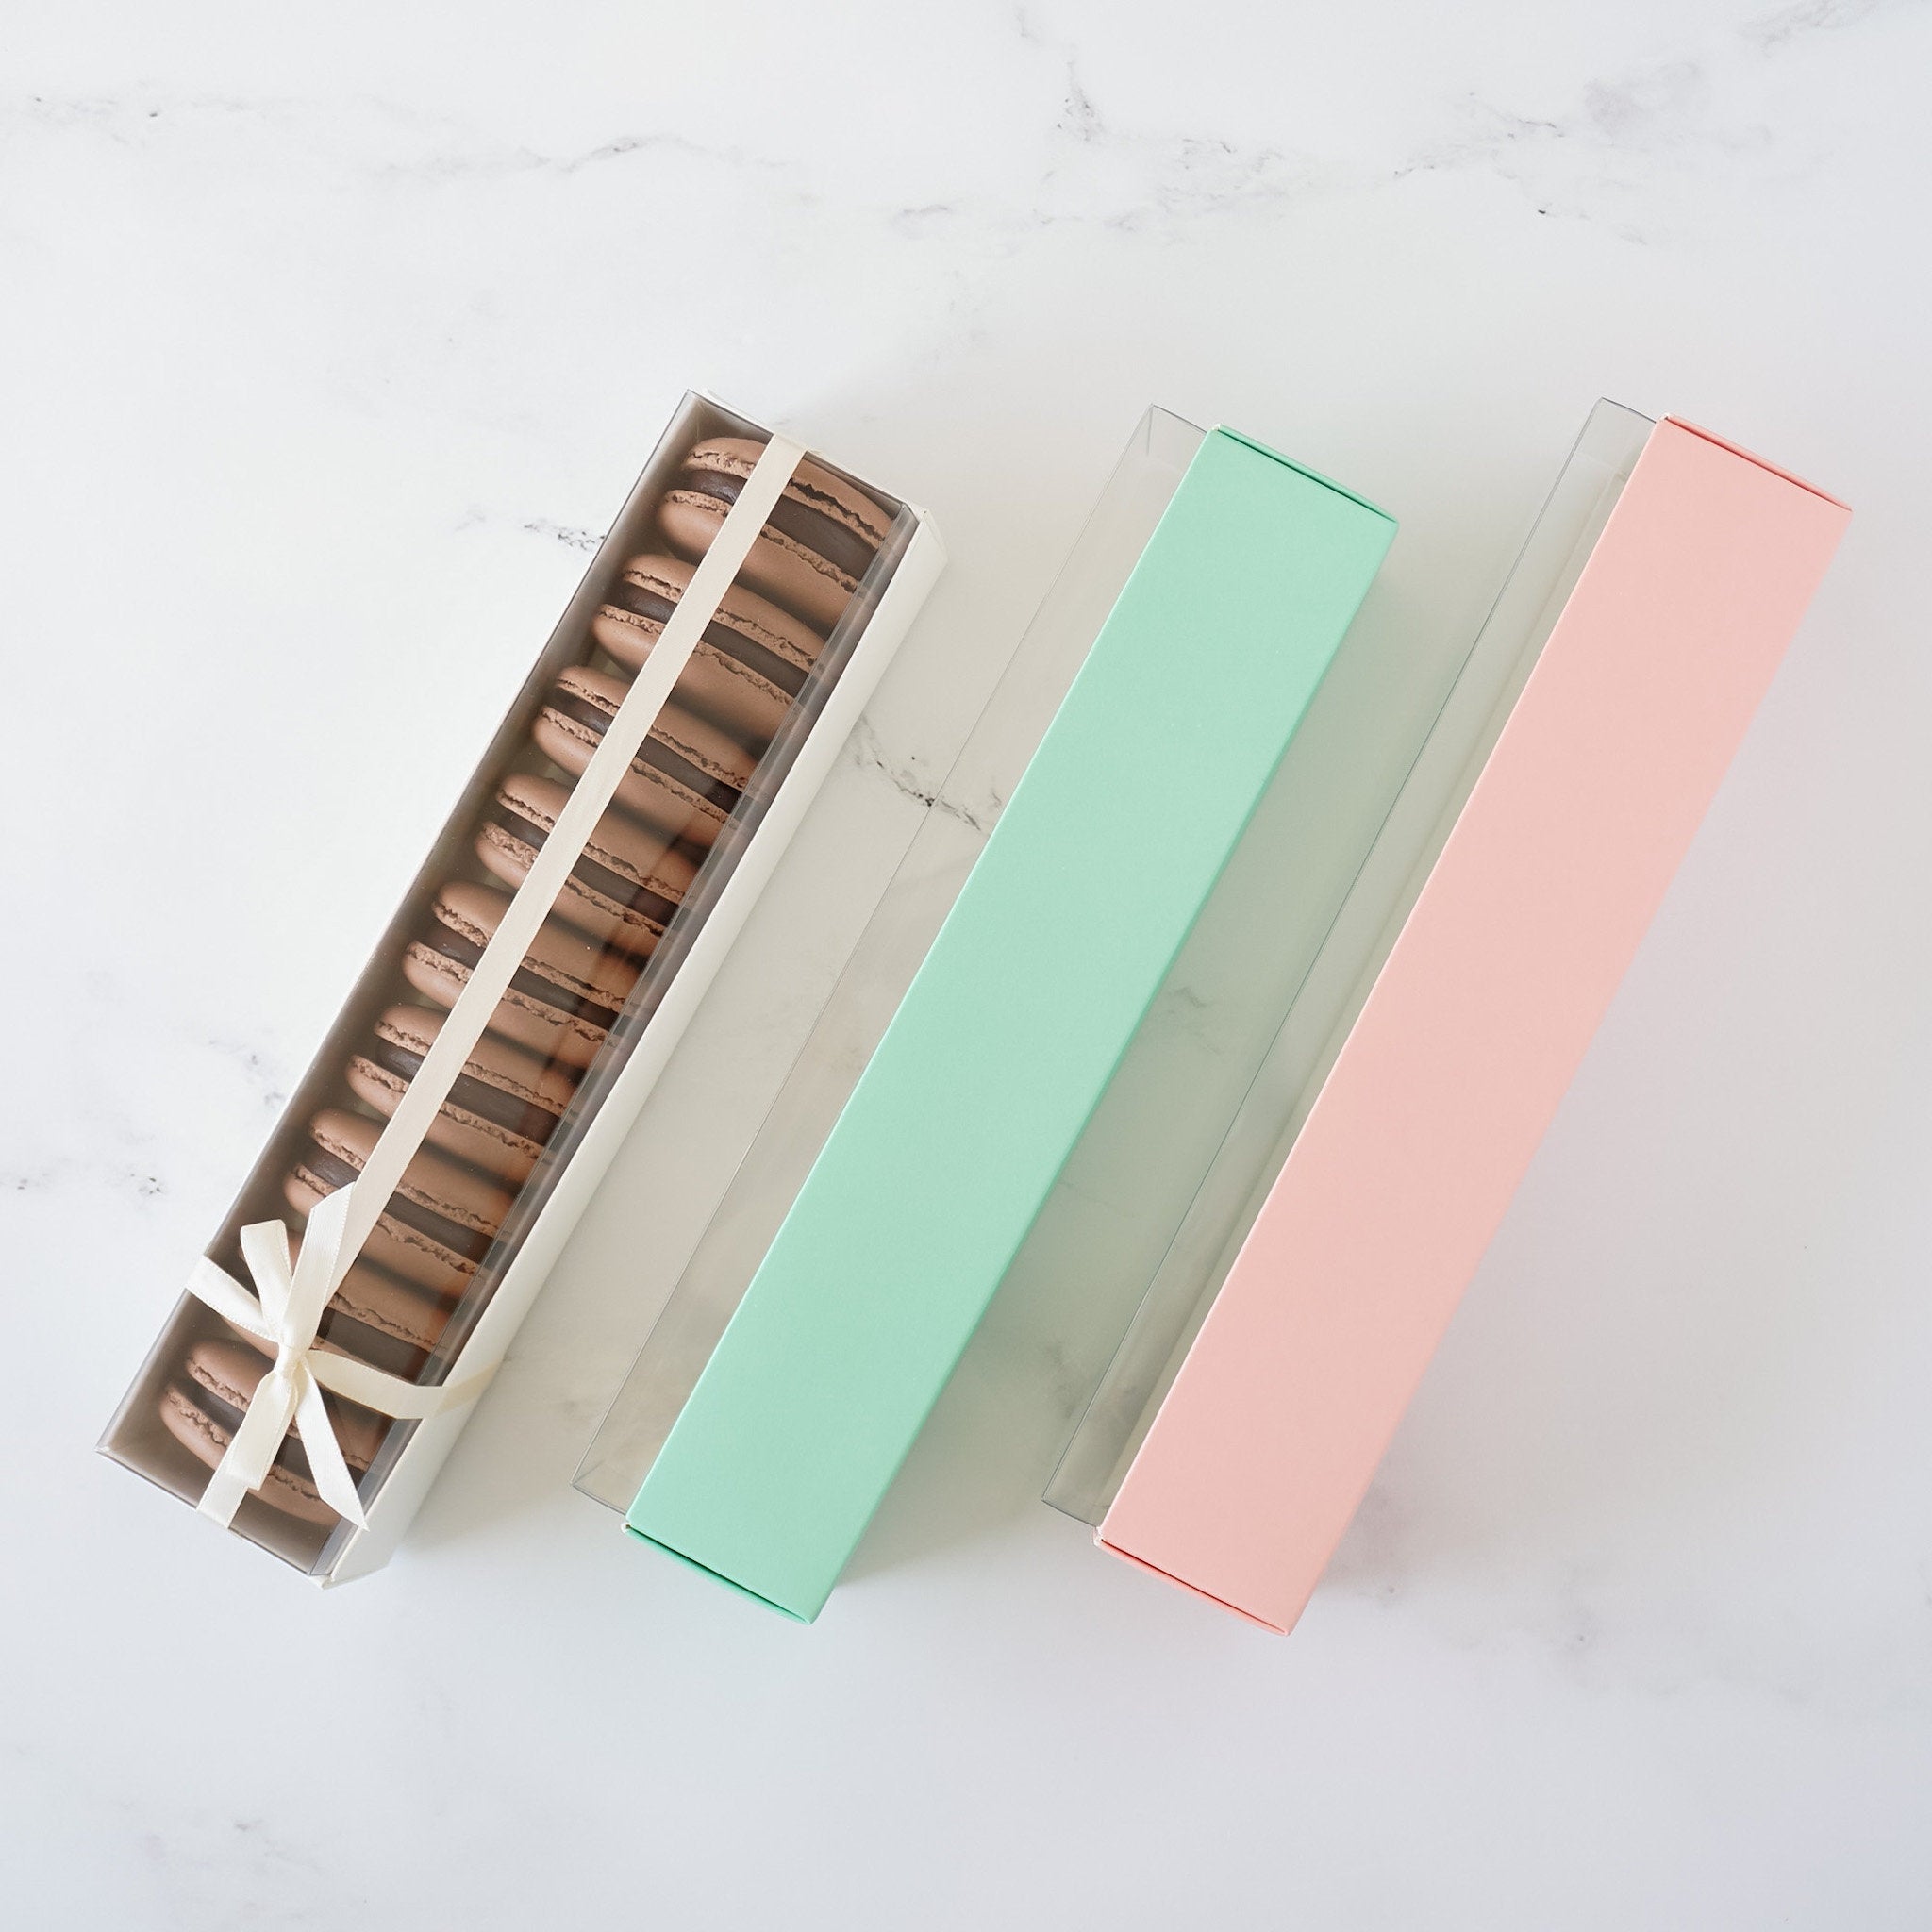 macaron boxes in white, mint, pink